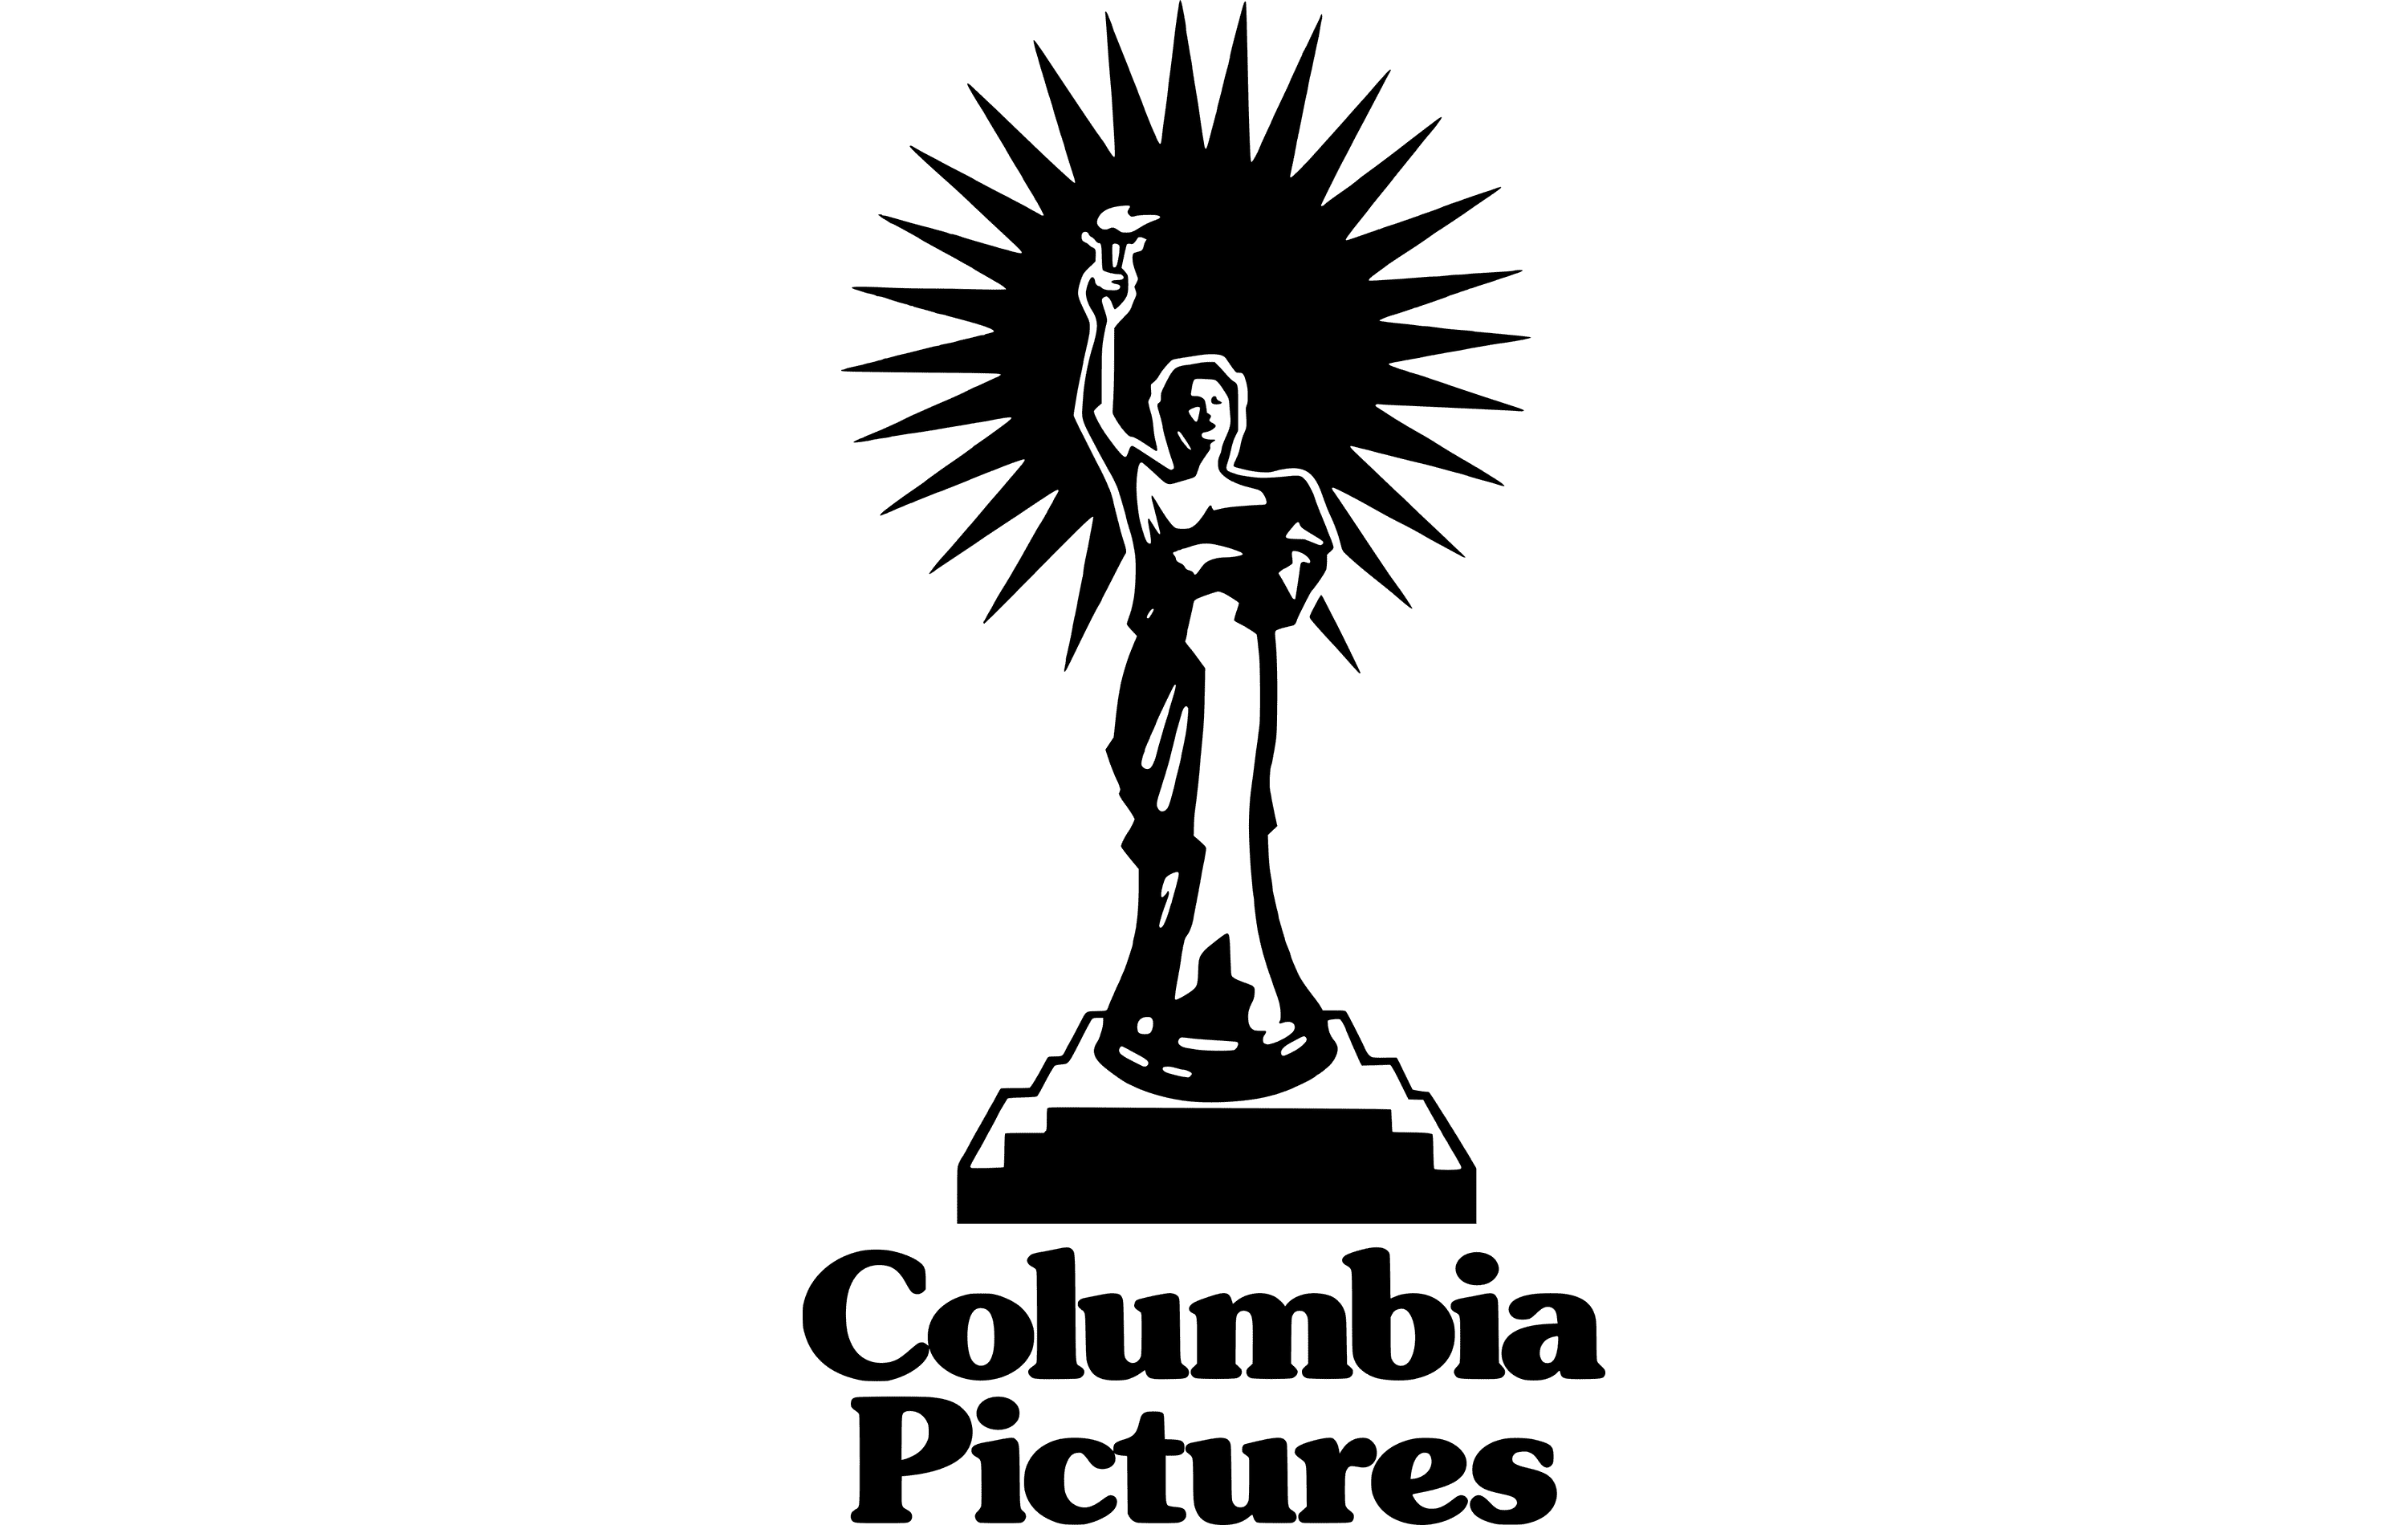 Sony Pictures Logo And Symbol Meaning History Png